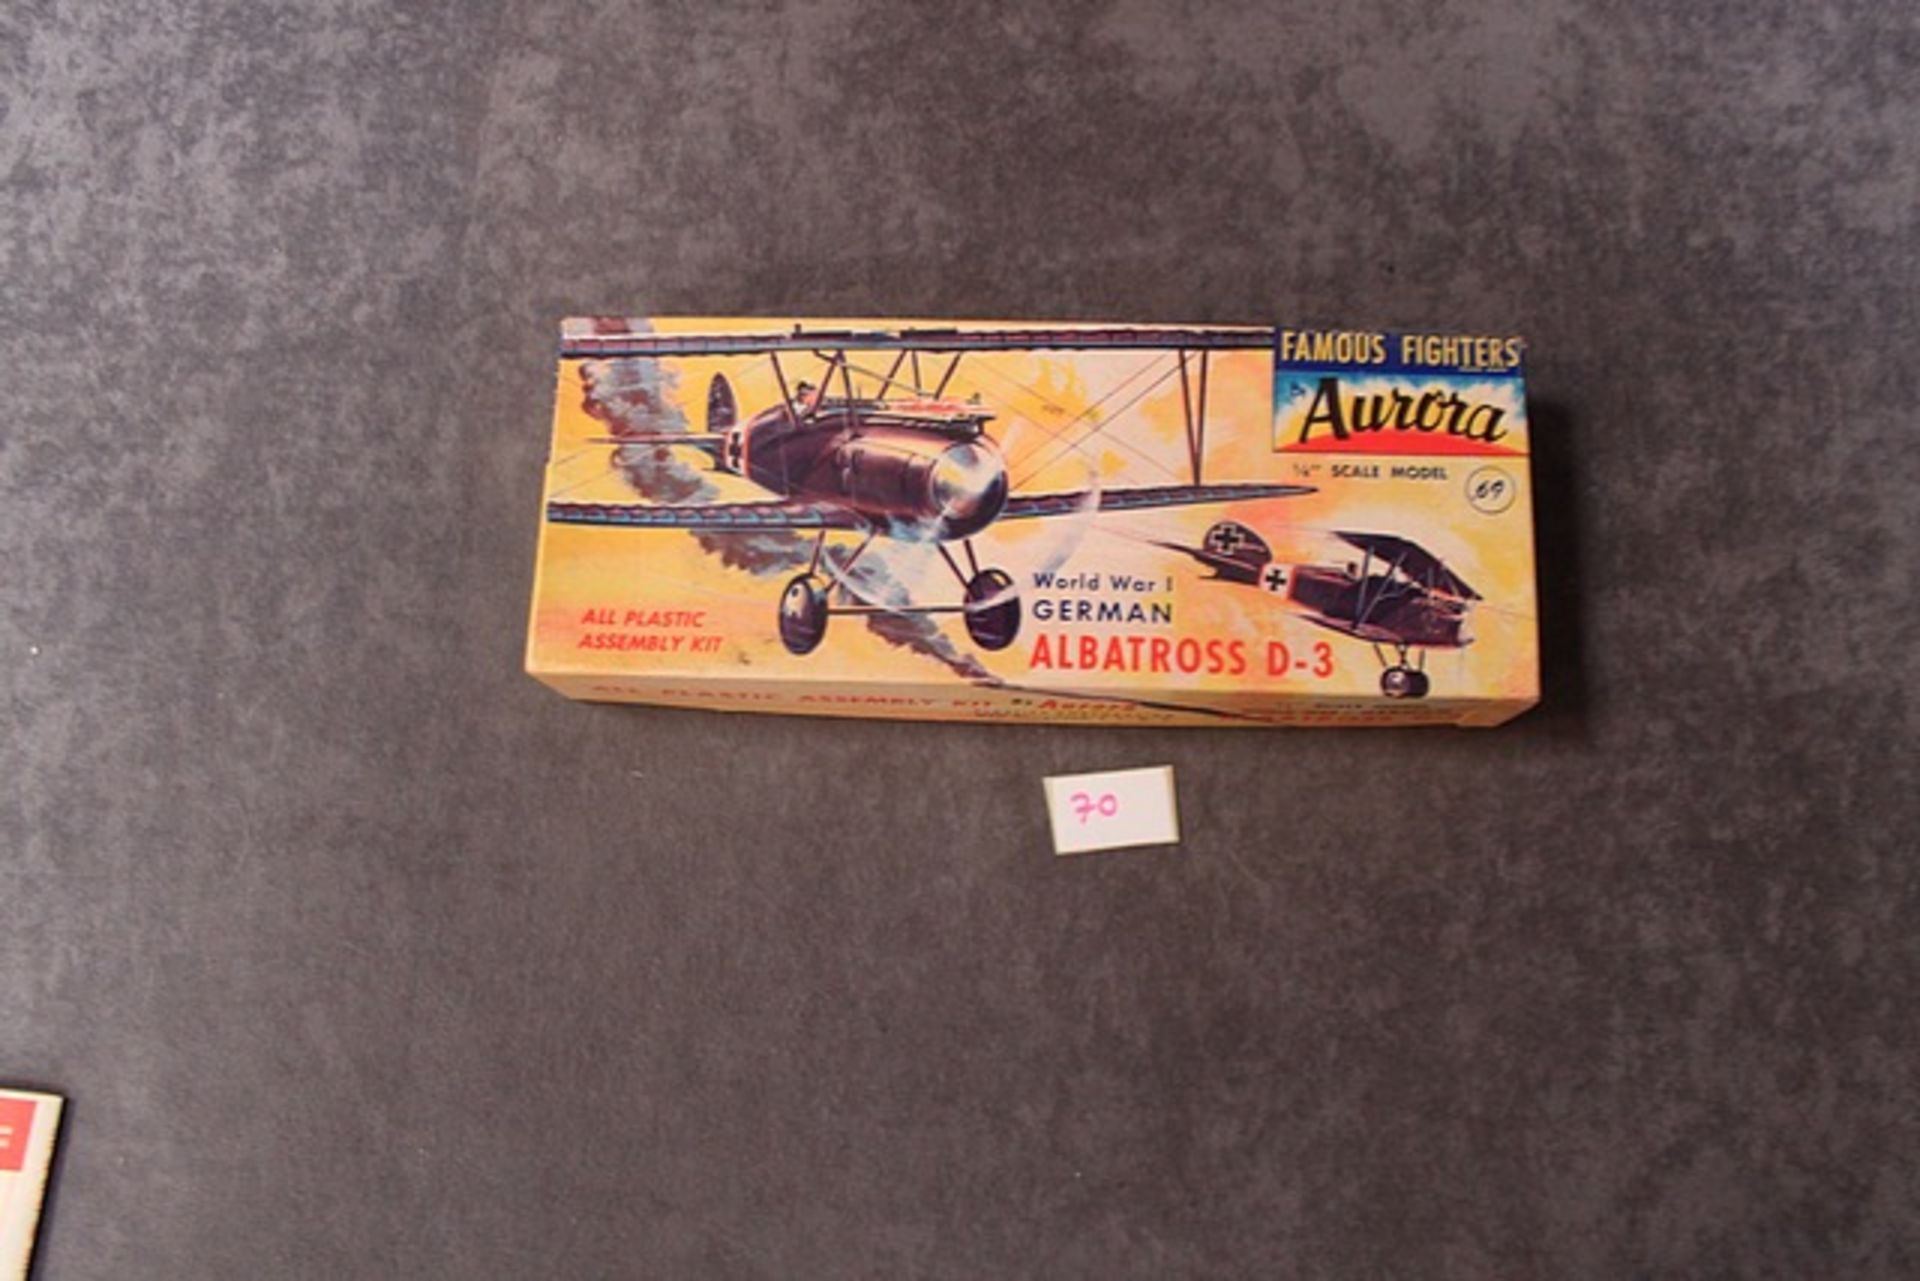 Aurora Hobby Kits Famous Fighters Series Kit Number 104-69 World War 1 German Albatross D-3 With - Image 2 of 2